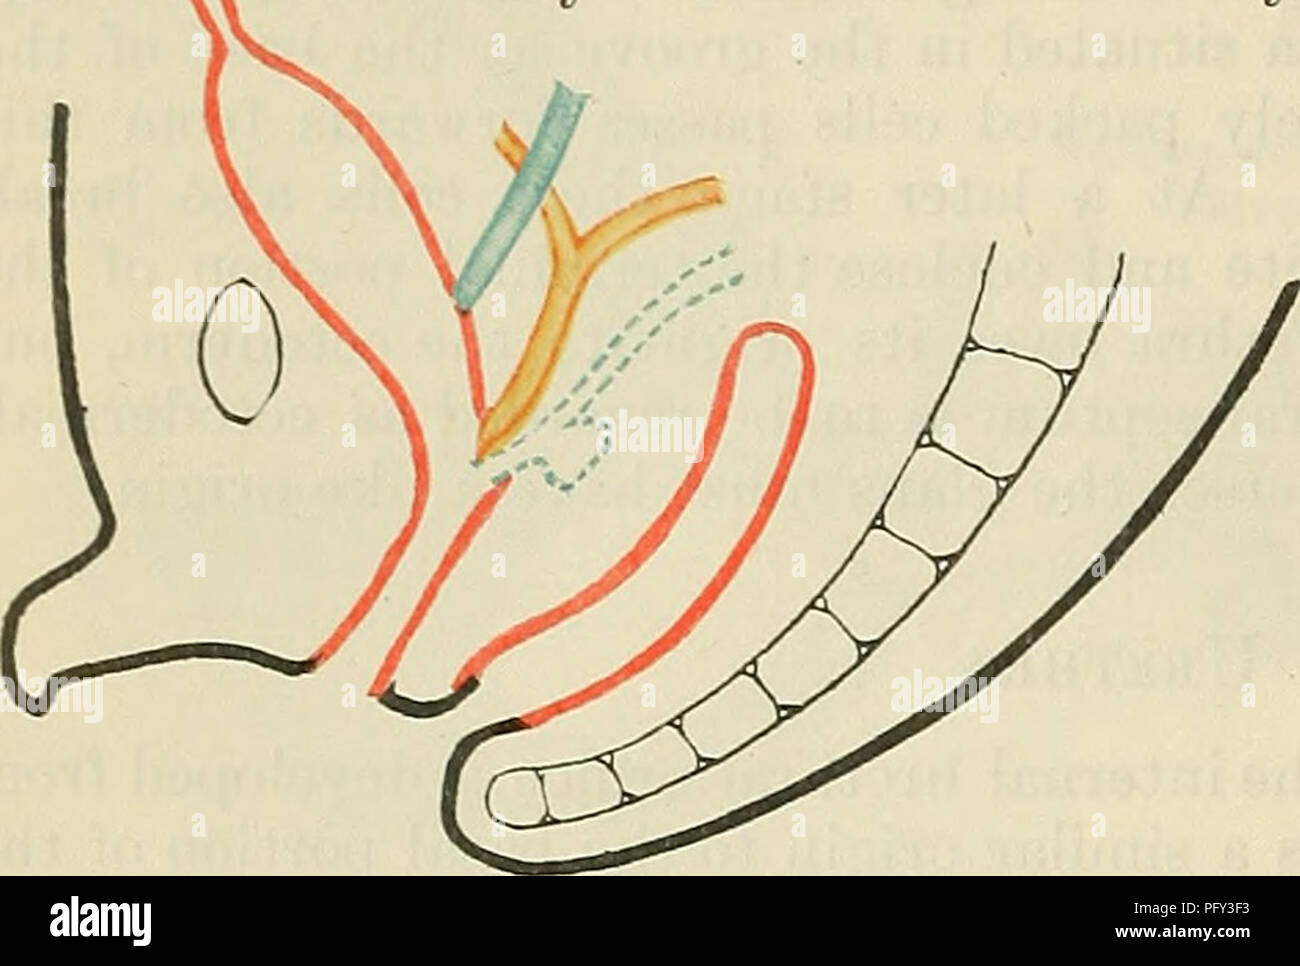 . Cunningham's Text-book of anatomy. Anatomy. 1334 THE URINO-GENITAL SYSTEM. secondarily with the ductuli efferentes which are derived from the tubules of the rrieso- nephros, and thus the mesonephric or Wolffian duct becomes the passage for the secretion of the testis. In the female large epithelial cells are found in the stroma of the developing ovary, beneath the germinal epithelium, as early as the thirty-third day. These primitive ova are much more numerous than the primitive sperm cells of the male, and form a very characteristic feature of the developing ovary. At first they lie isolate Stock Photo